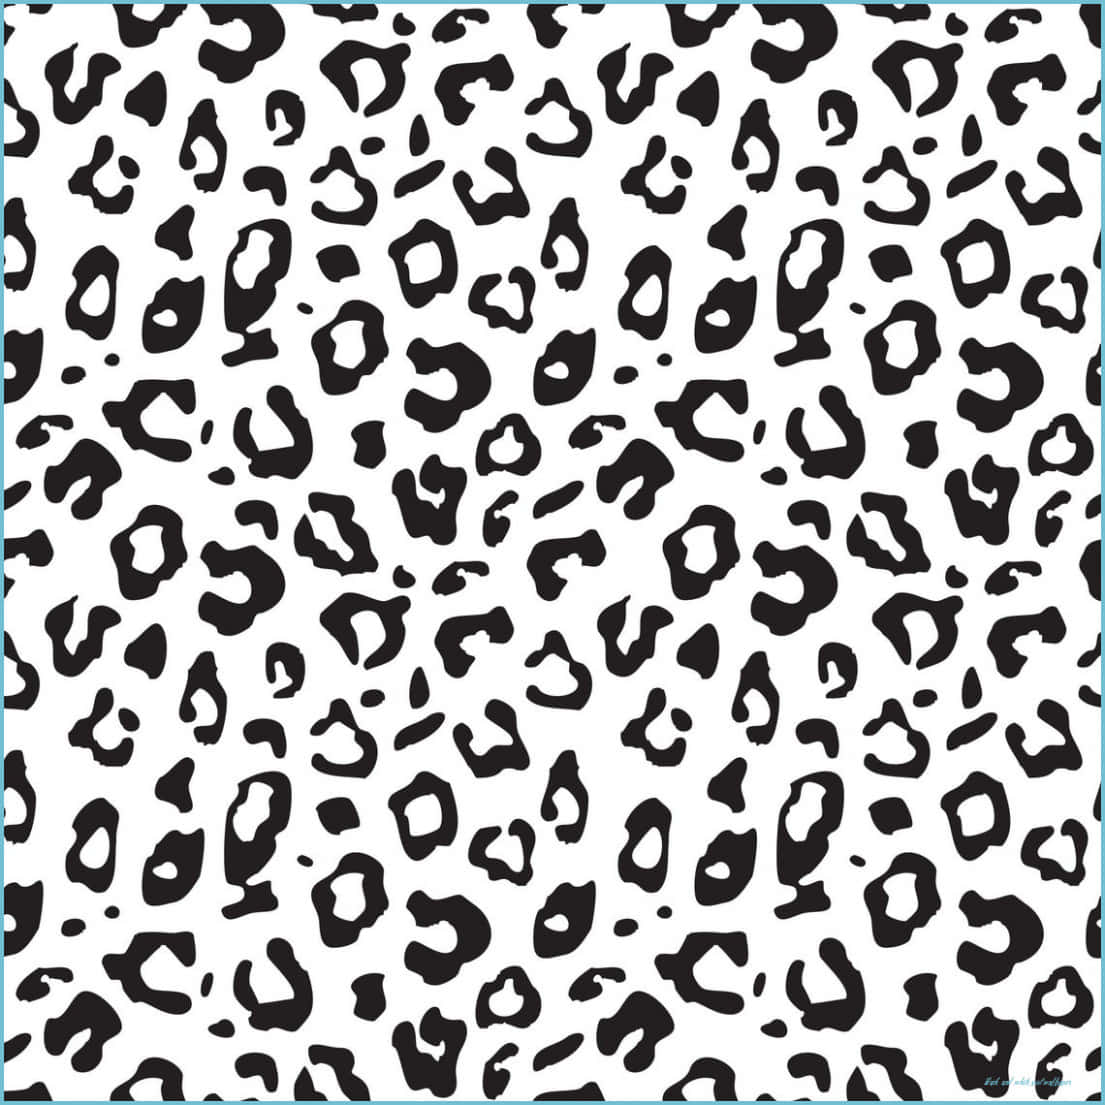 Showing your wild side with this edgy white leopard print Wallpaper